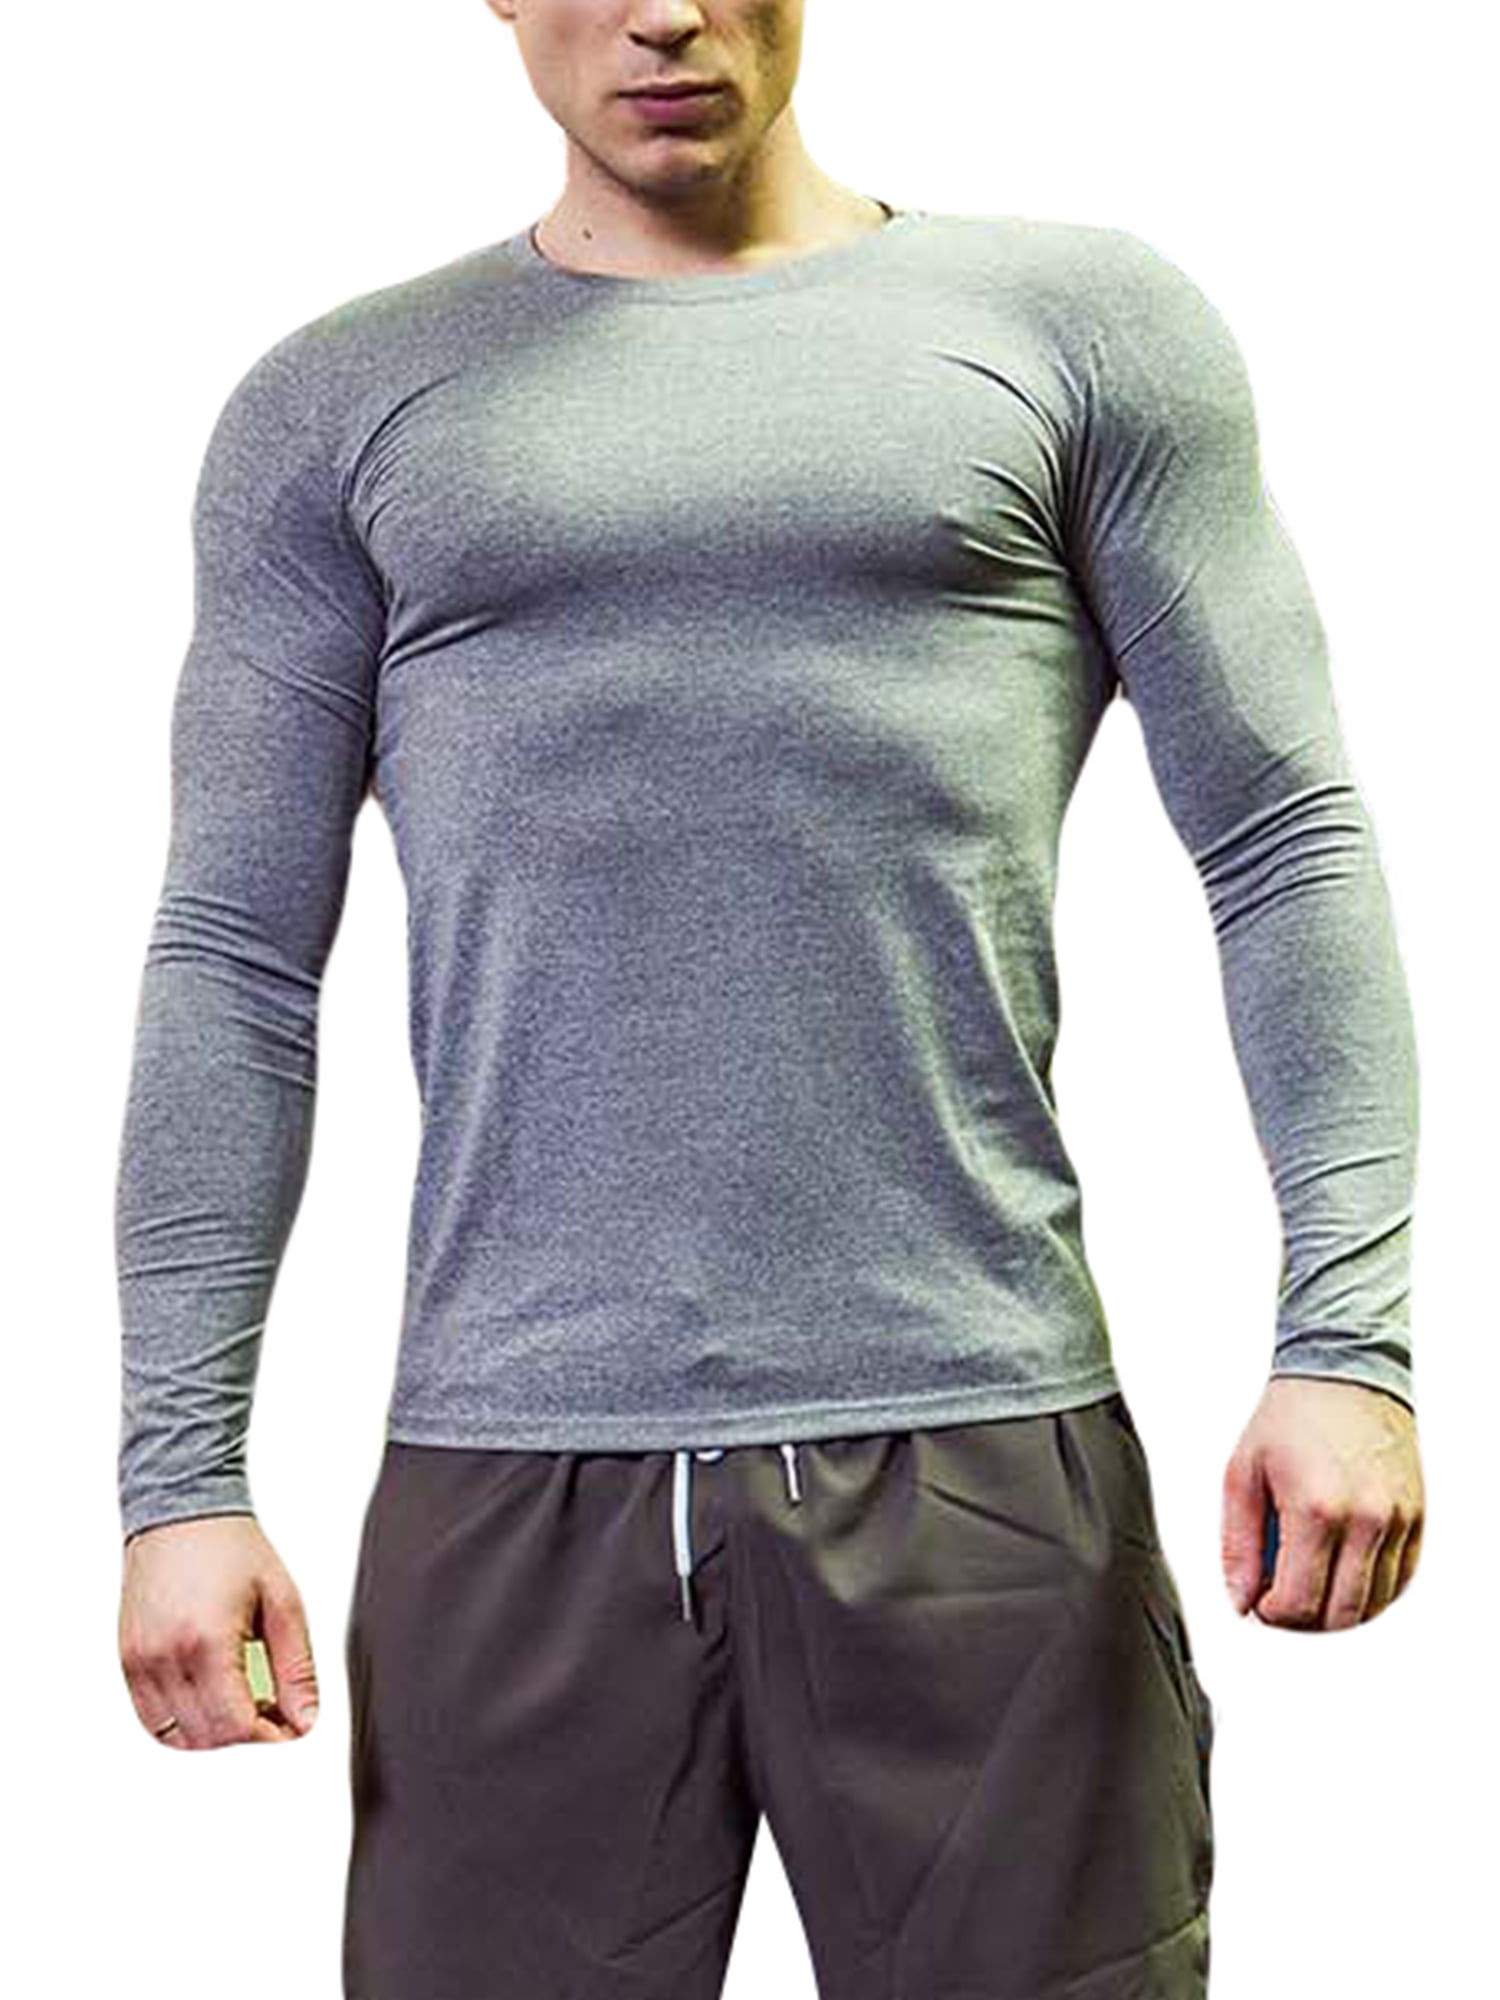 3 Pack Mens Compression Workout Shirts Cool Dry Wicking Athletic Performance Long Sleeve Baselayer Shirt 